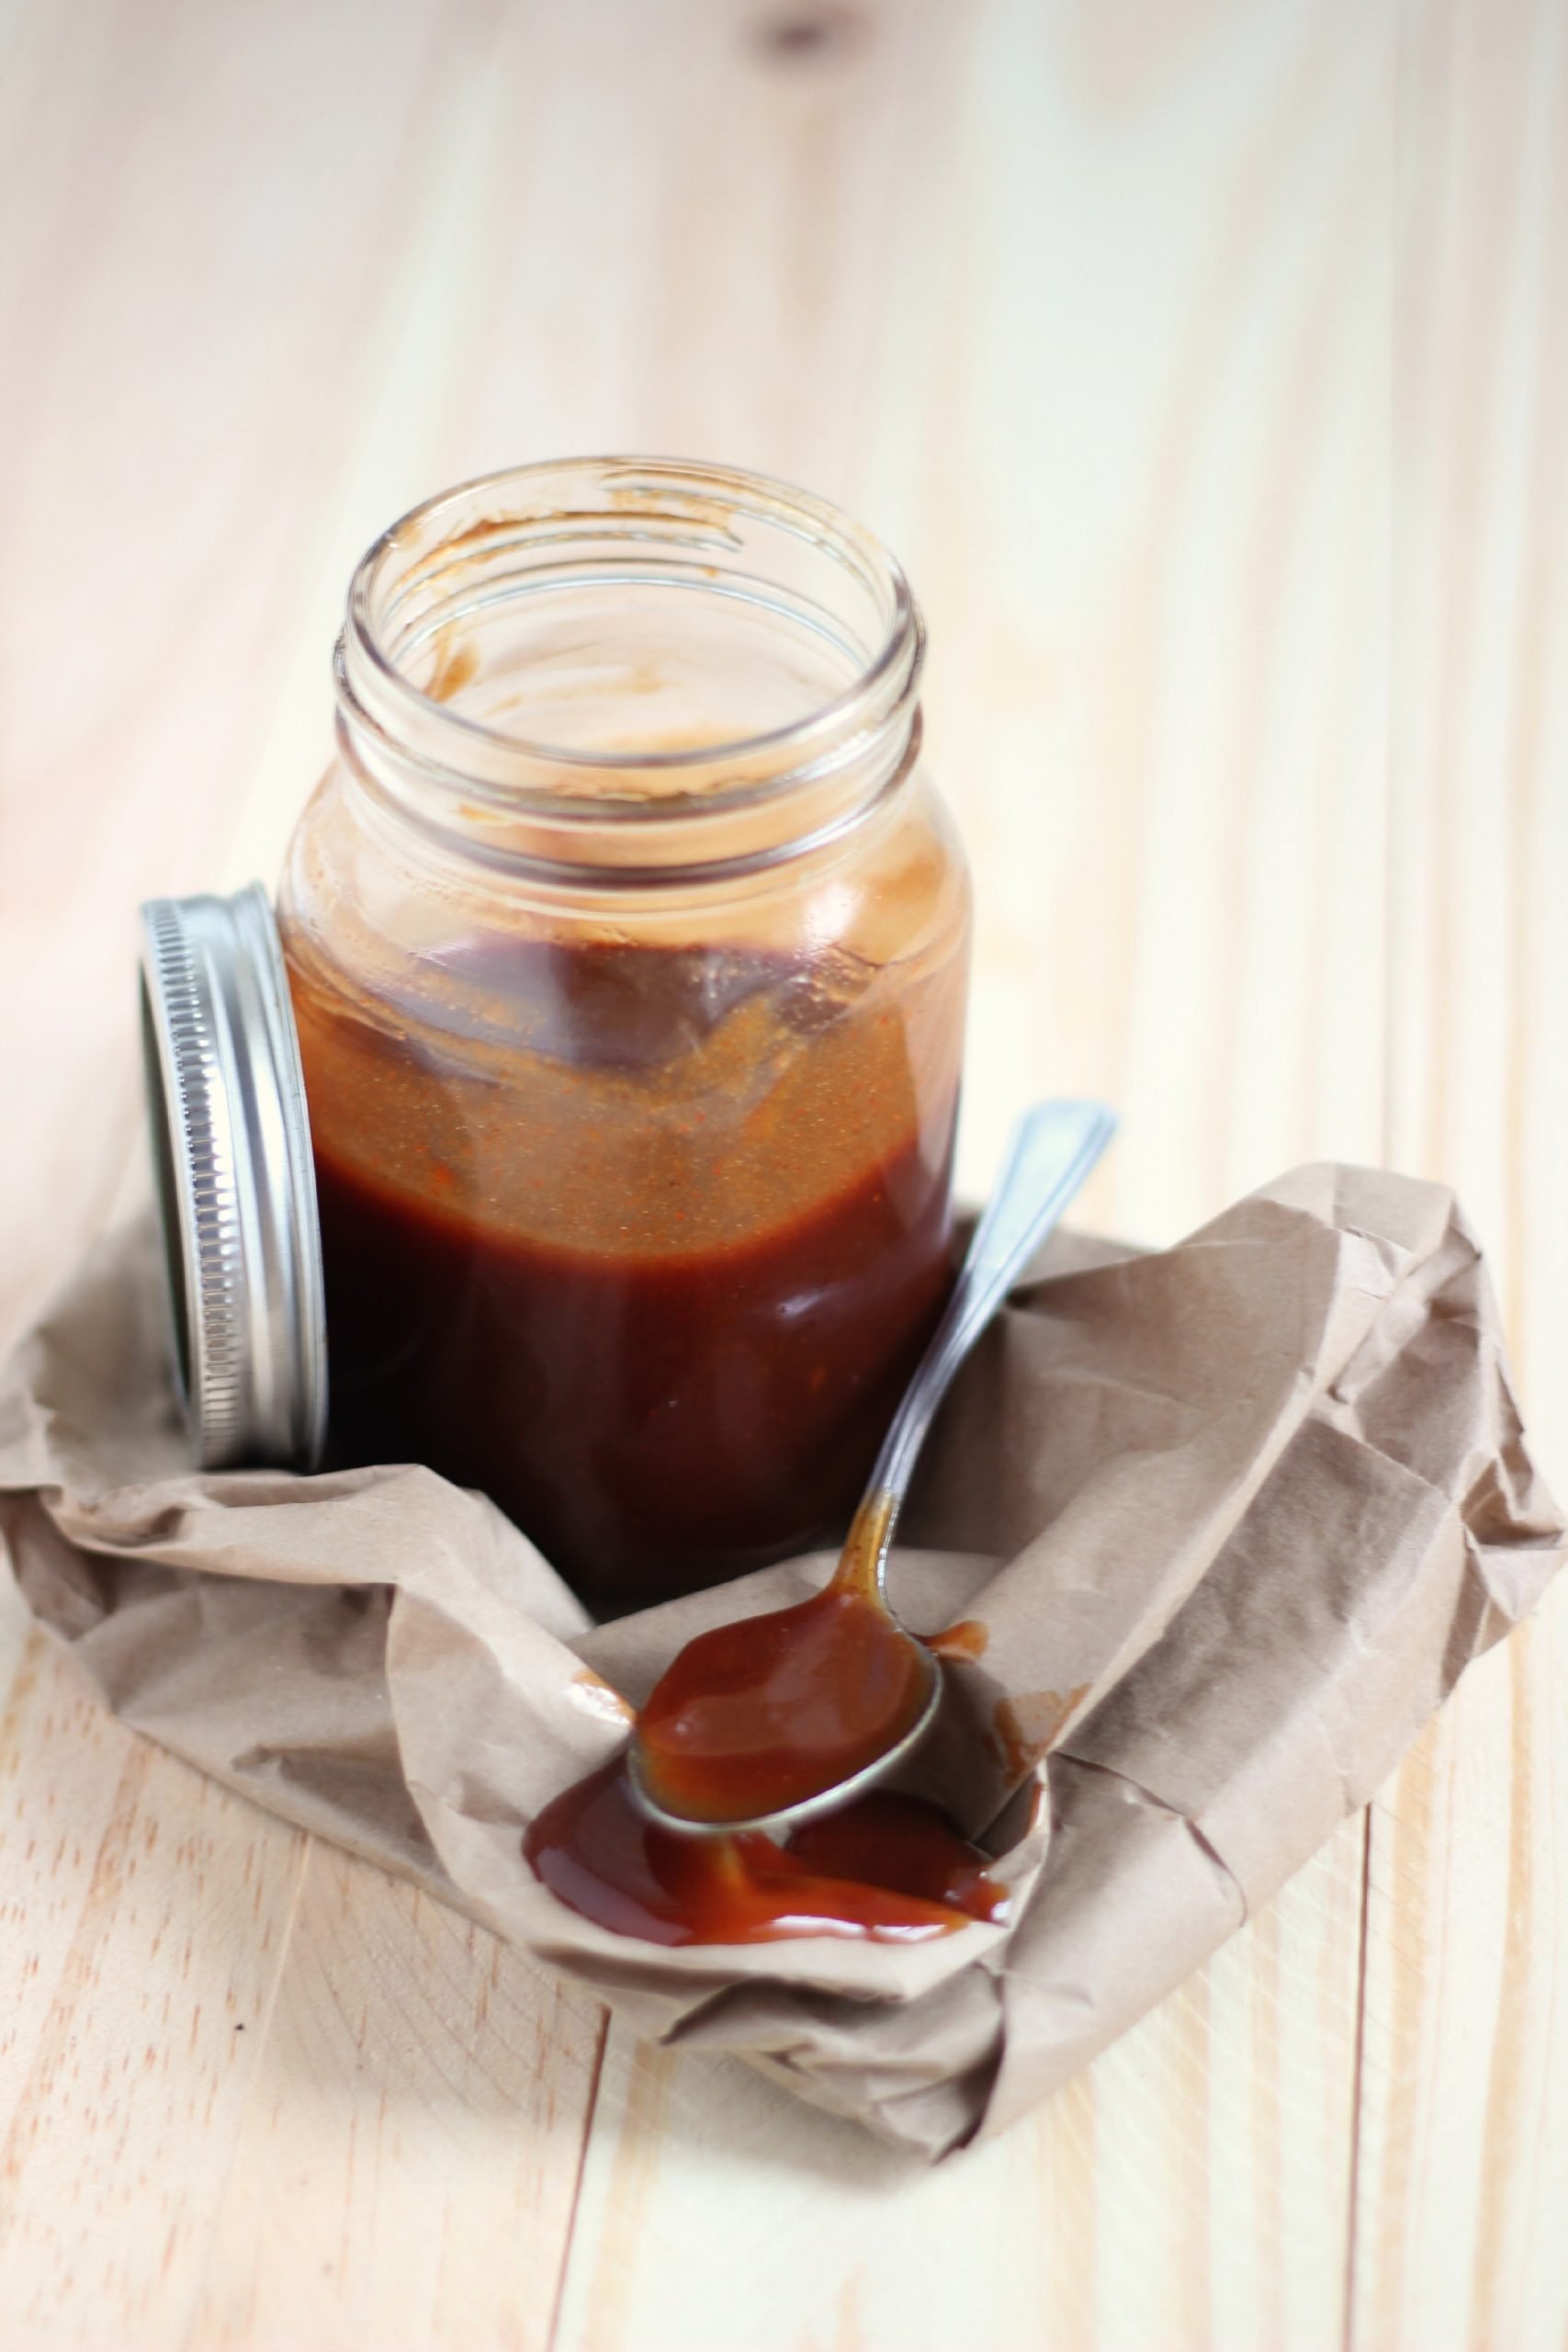 Homemade Barbecue Sauceâ¦from SCRATCH! â Purple House CafÃ©